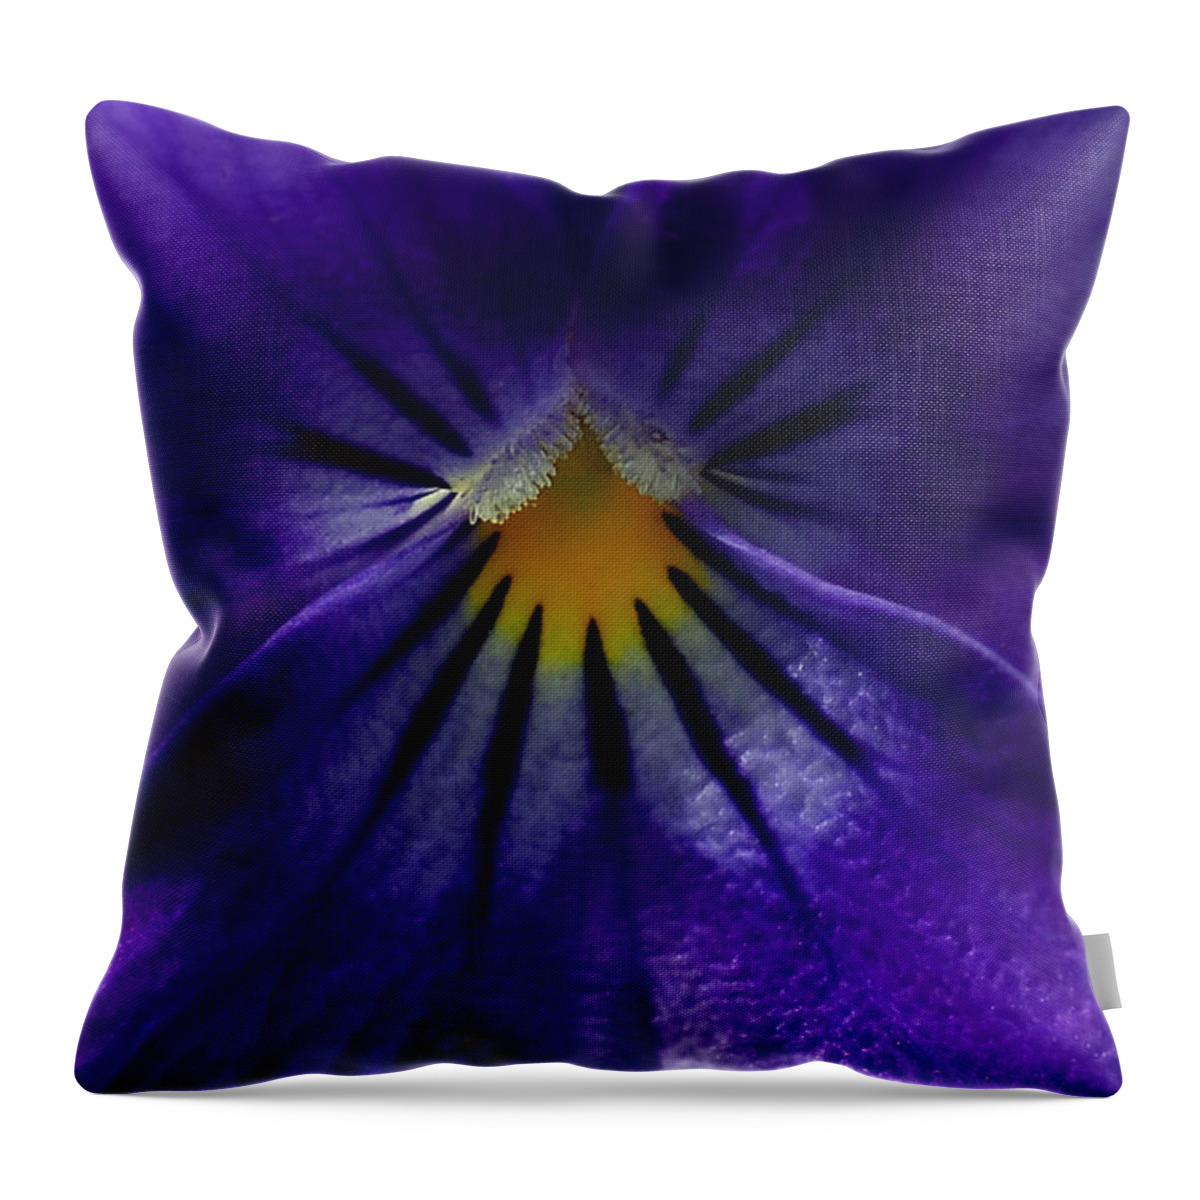 Pansies Throw Pillow featuring the photograph Pansy Abstract by Lisa Phillips